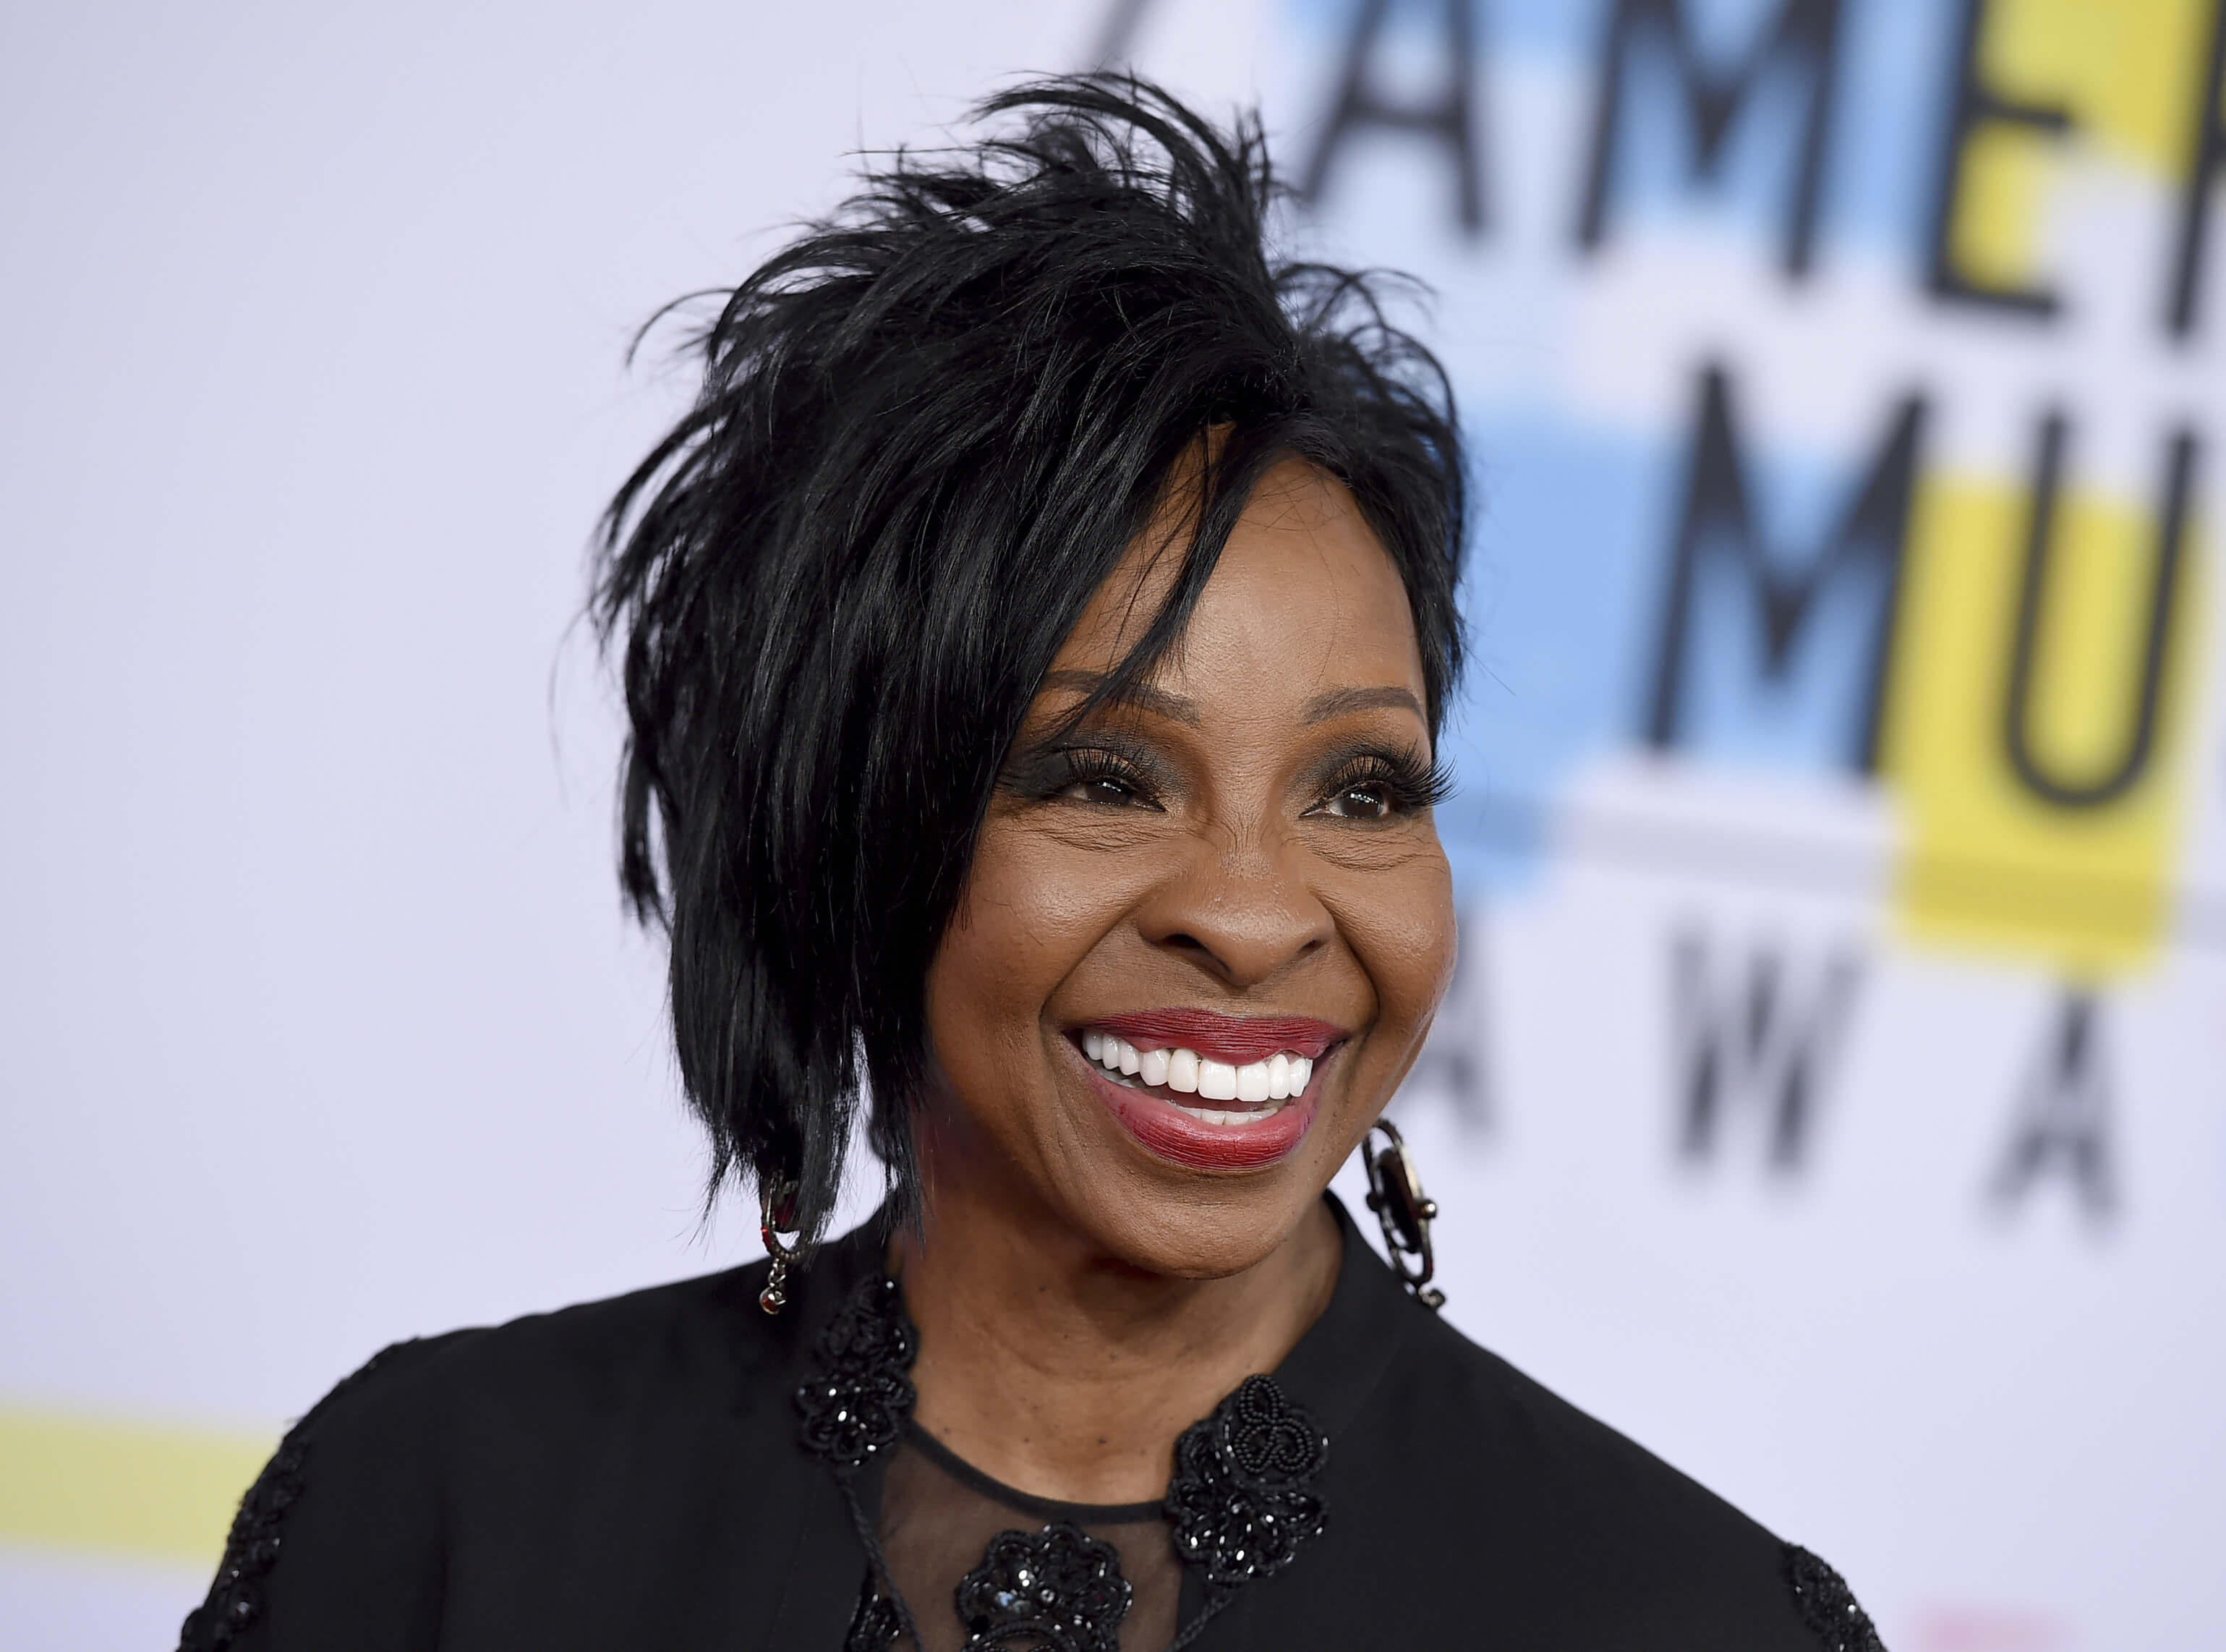 Gladys Knight arrives at the American Music Awards in Los Angeles on Oct. 9, 2018.